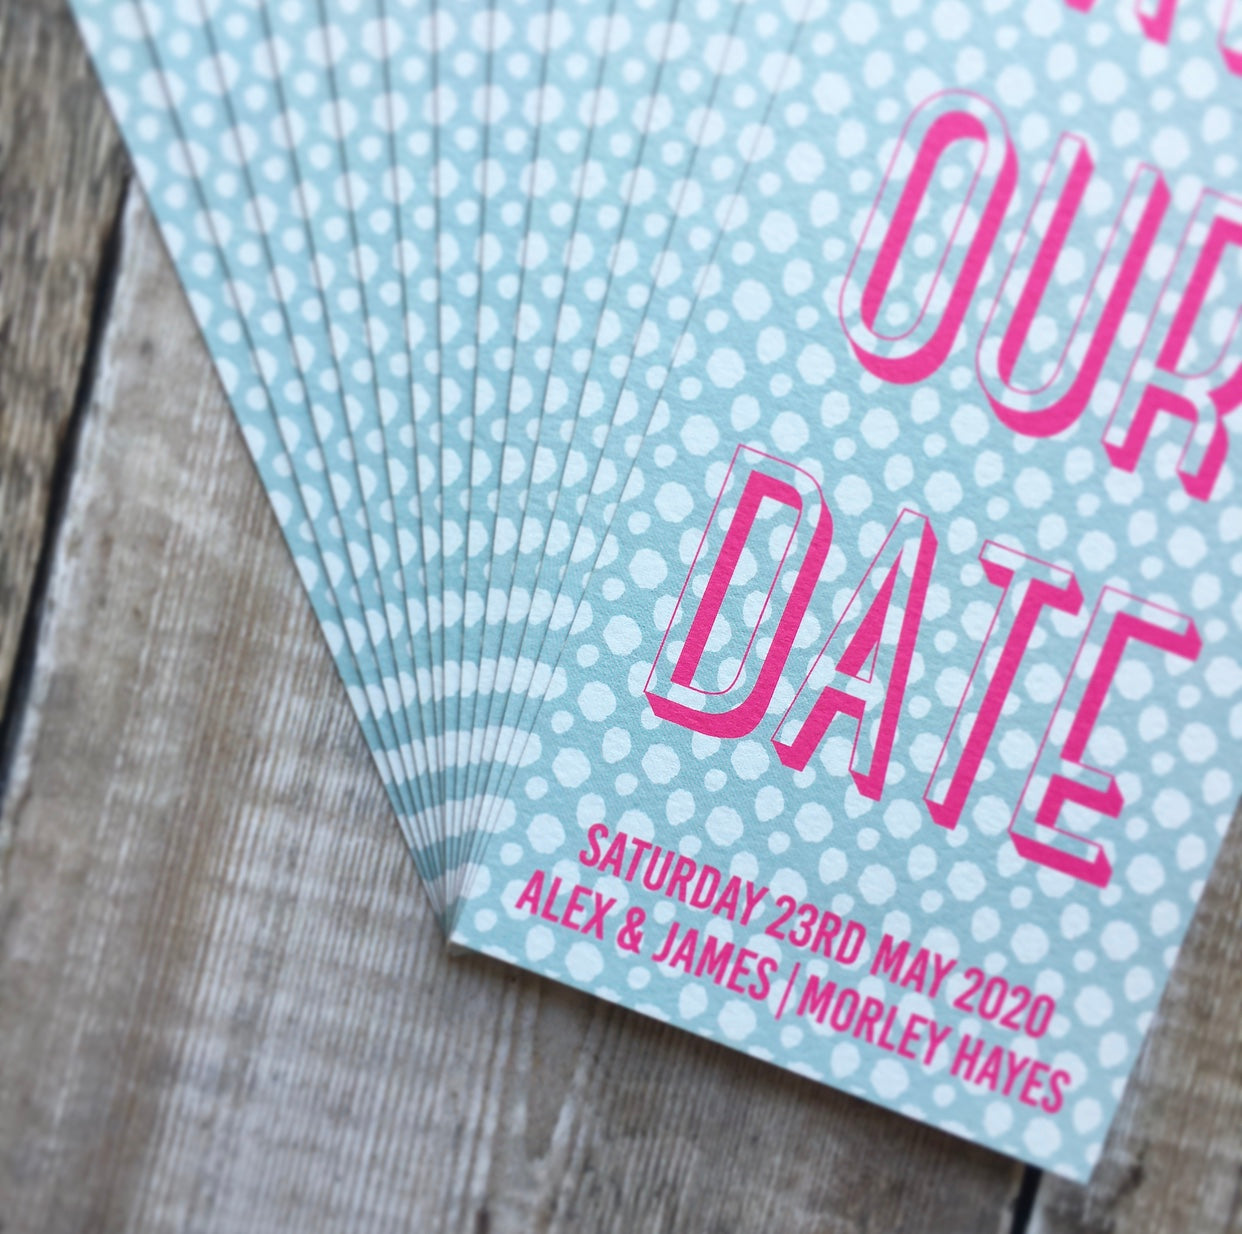 Close-up view. Bookmark-style wedding invitation/save the date. 99mm x 210mm. Pale blue background, with a white spotted pattern. Text is typographic, and written in fluorescent pink.